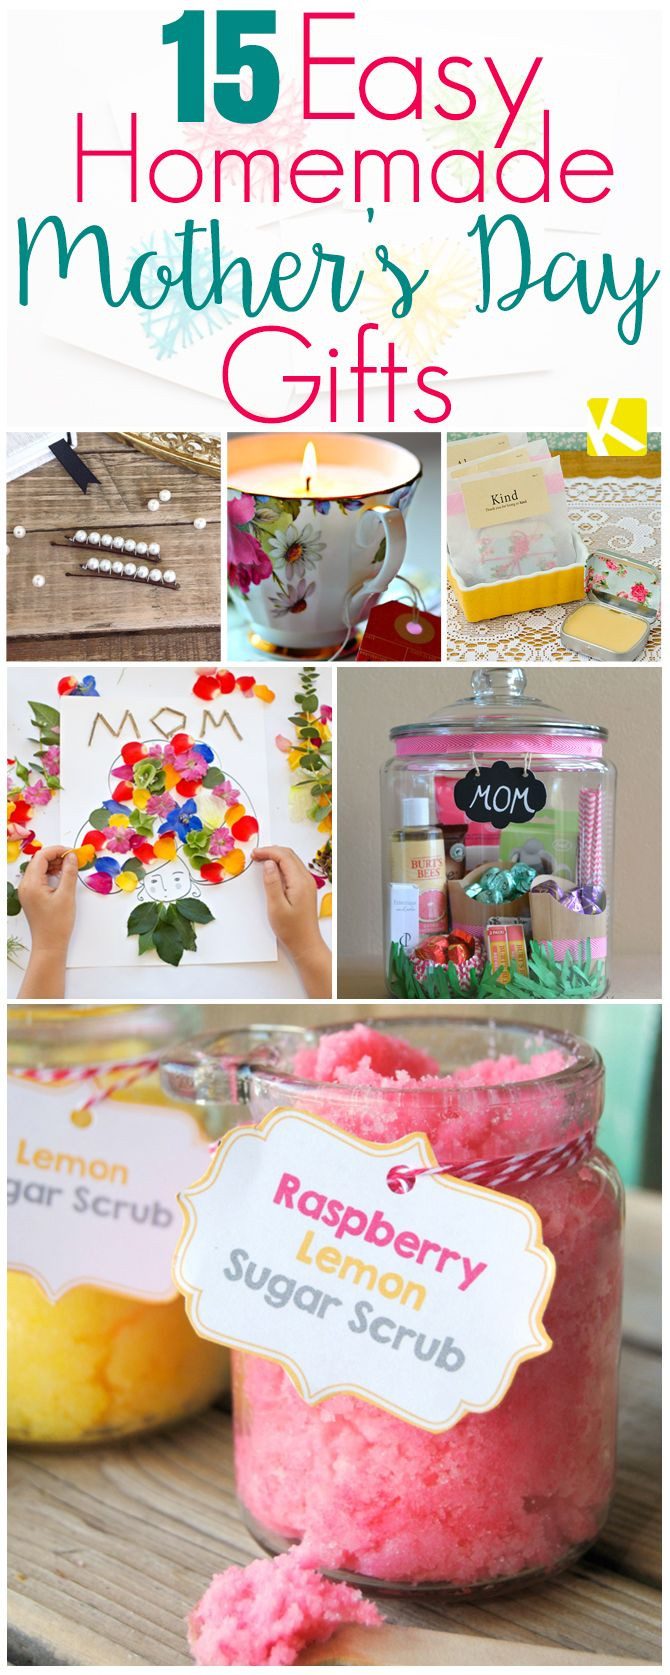 Easy DIY Gifts For Mom
 15 Mother’s Day Gifts That Are Ridiculously Easy to Make